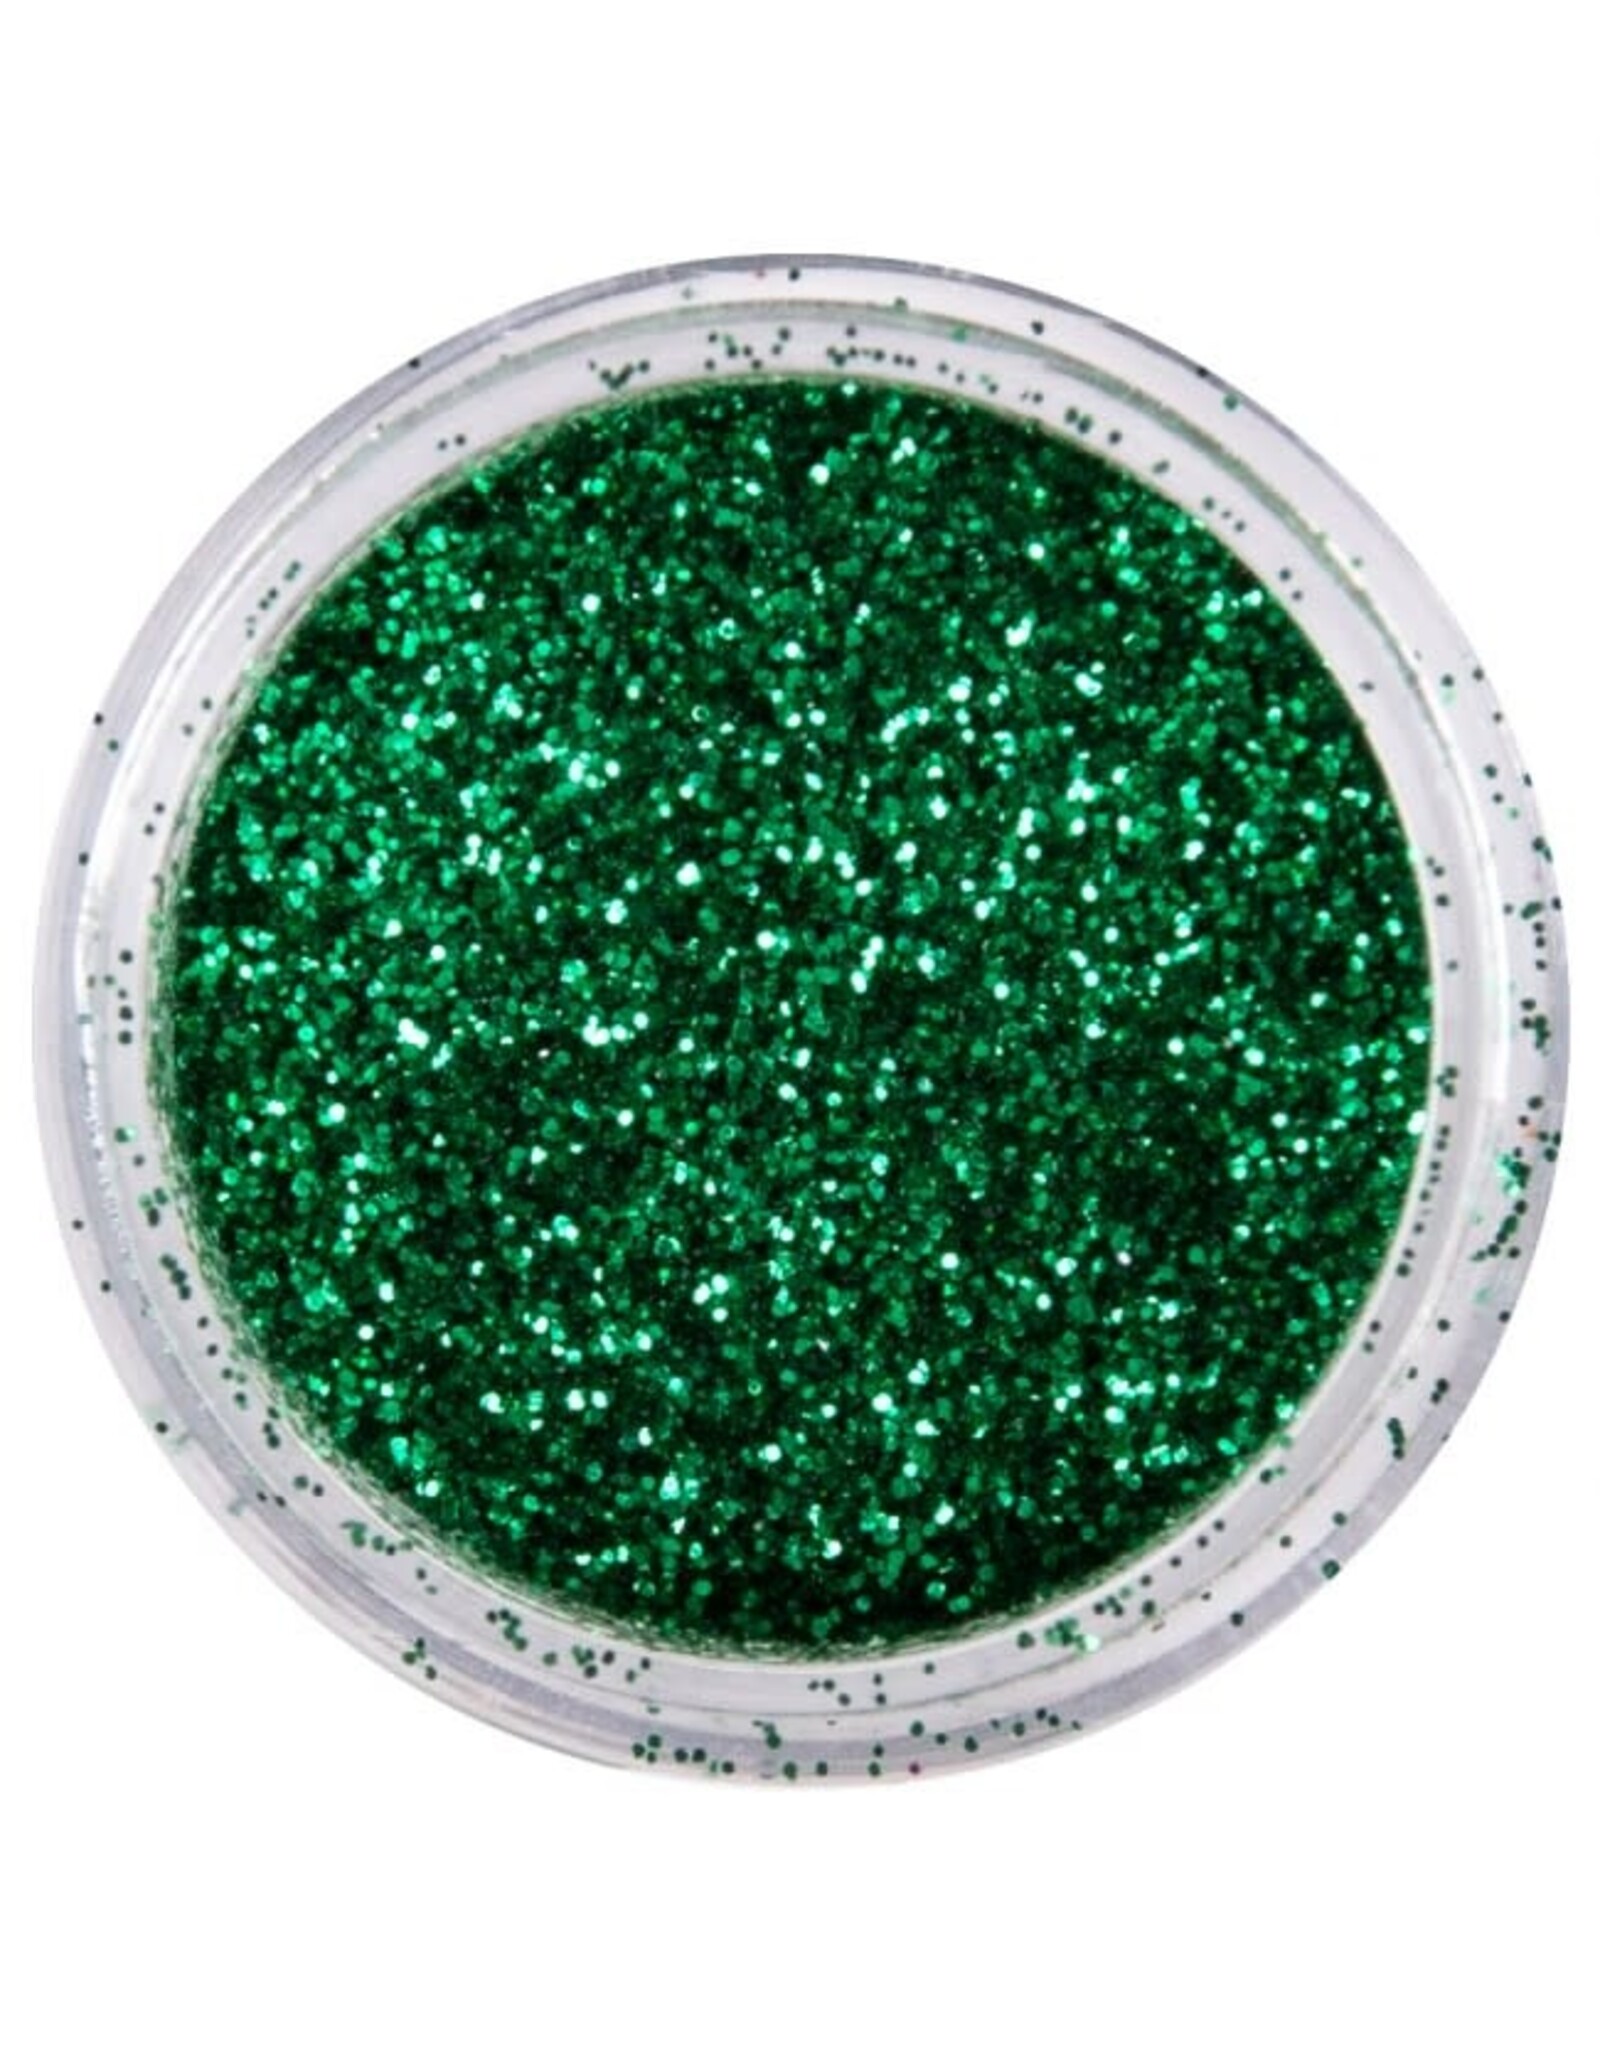 PartyXplosion PXP biodegradable powder glitter 2.5g green forest